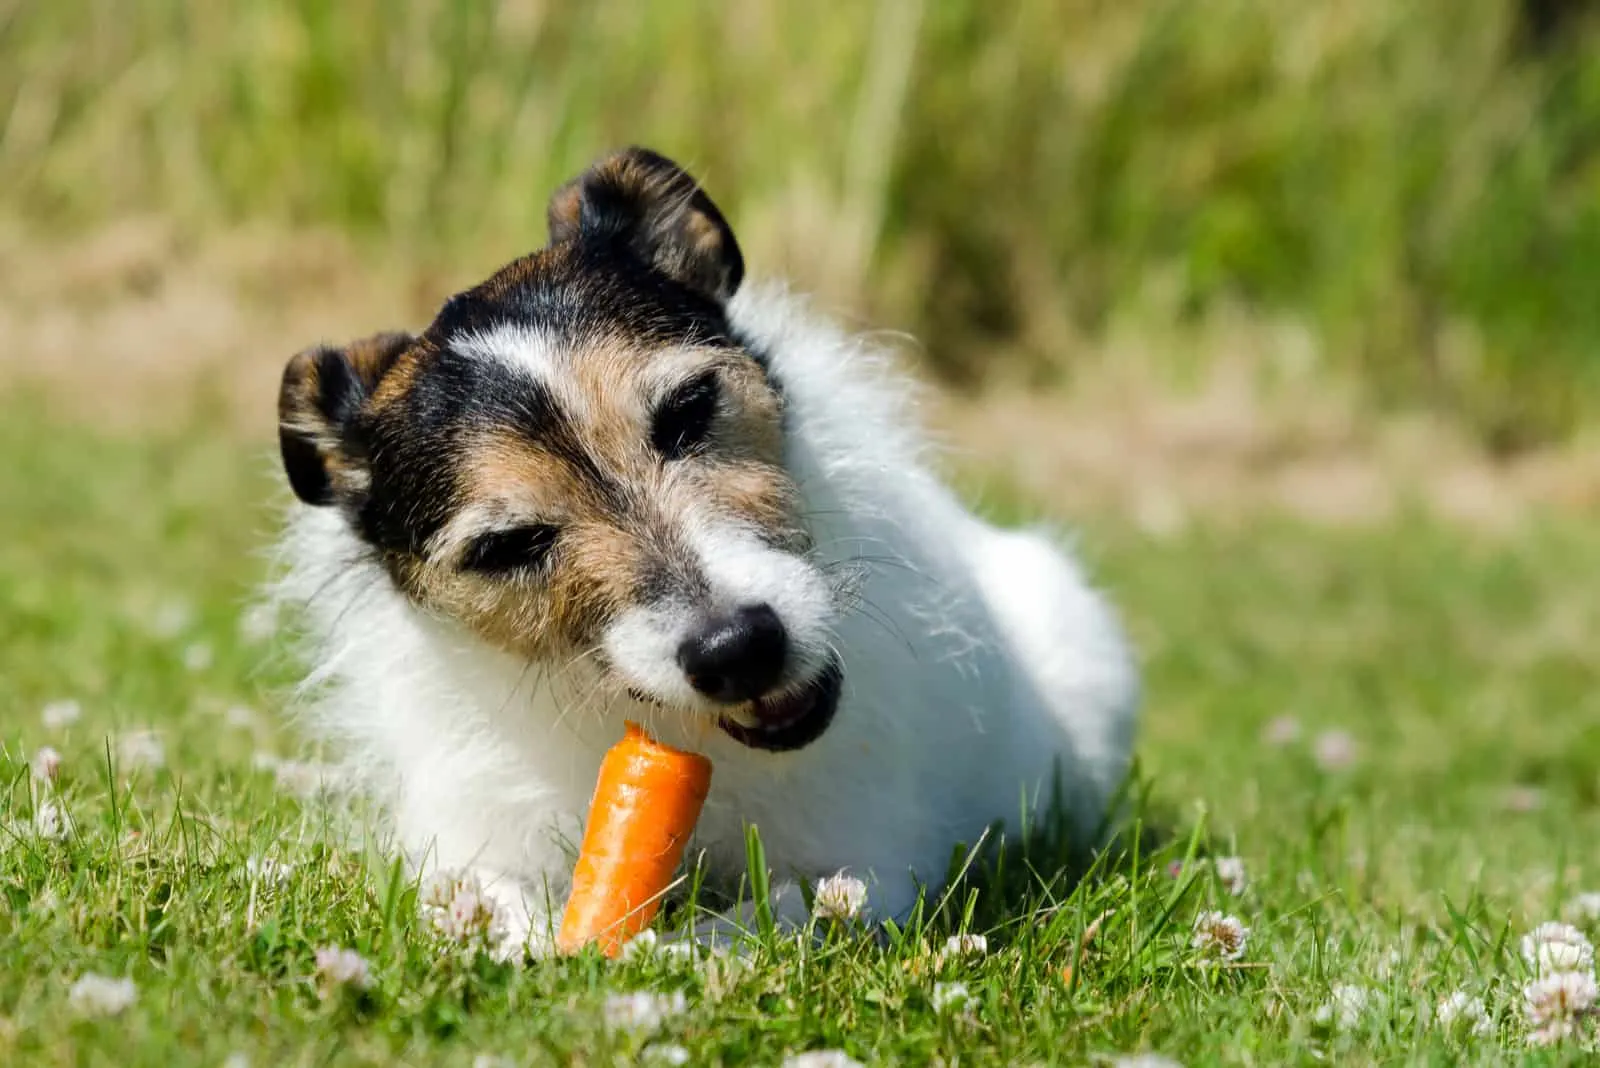 A Parson Jack Russell Terrier eating a raw carrot